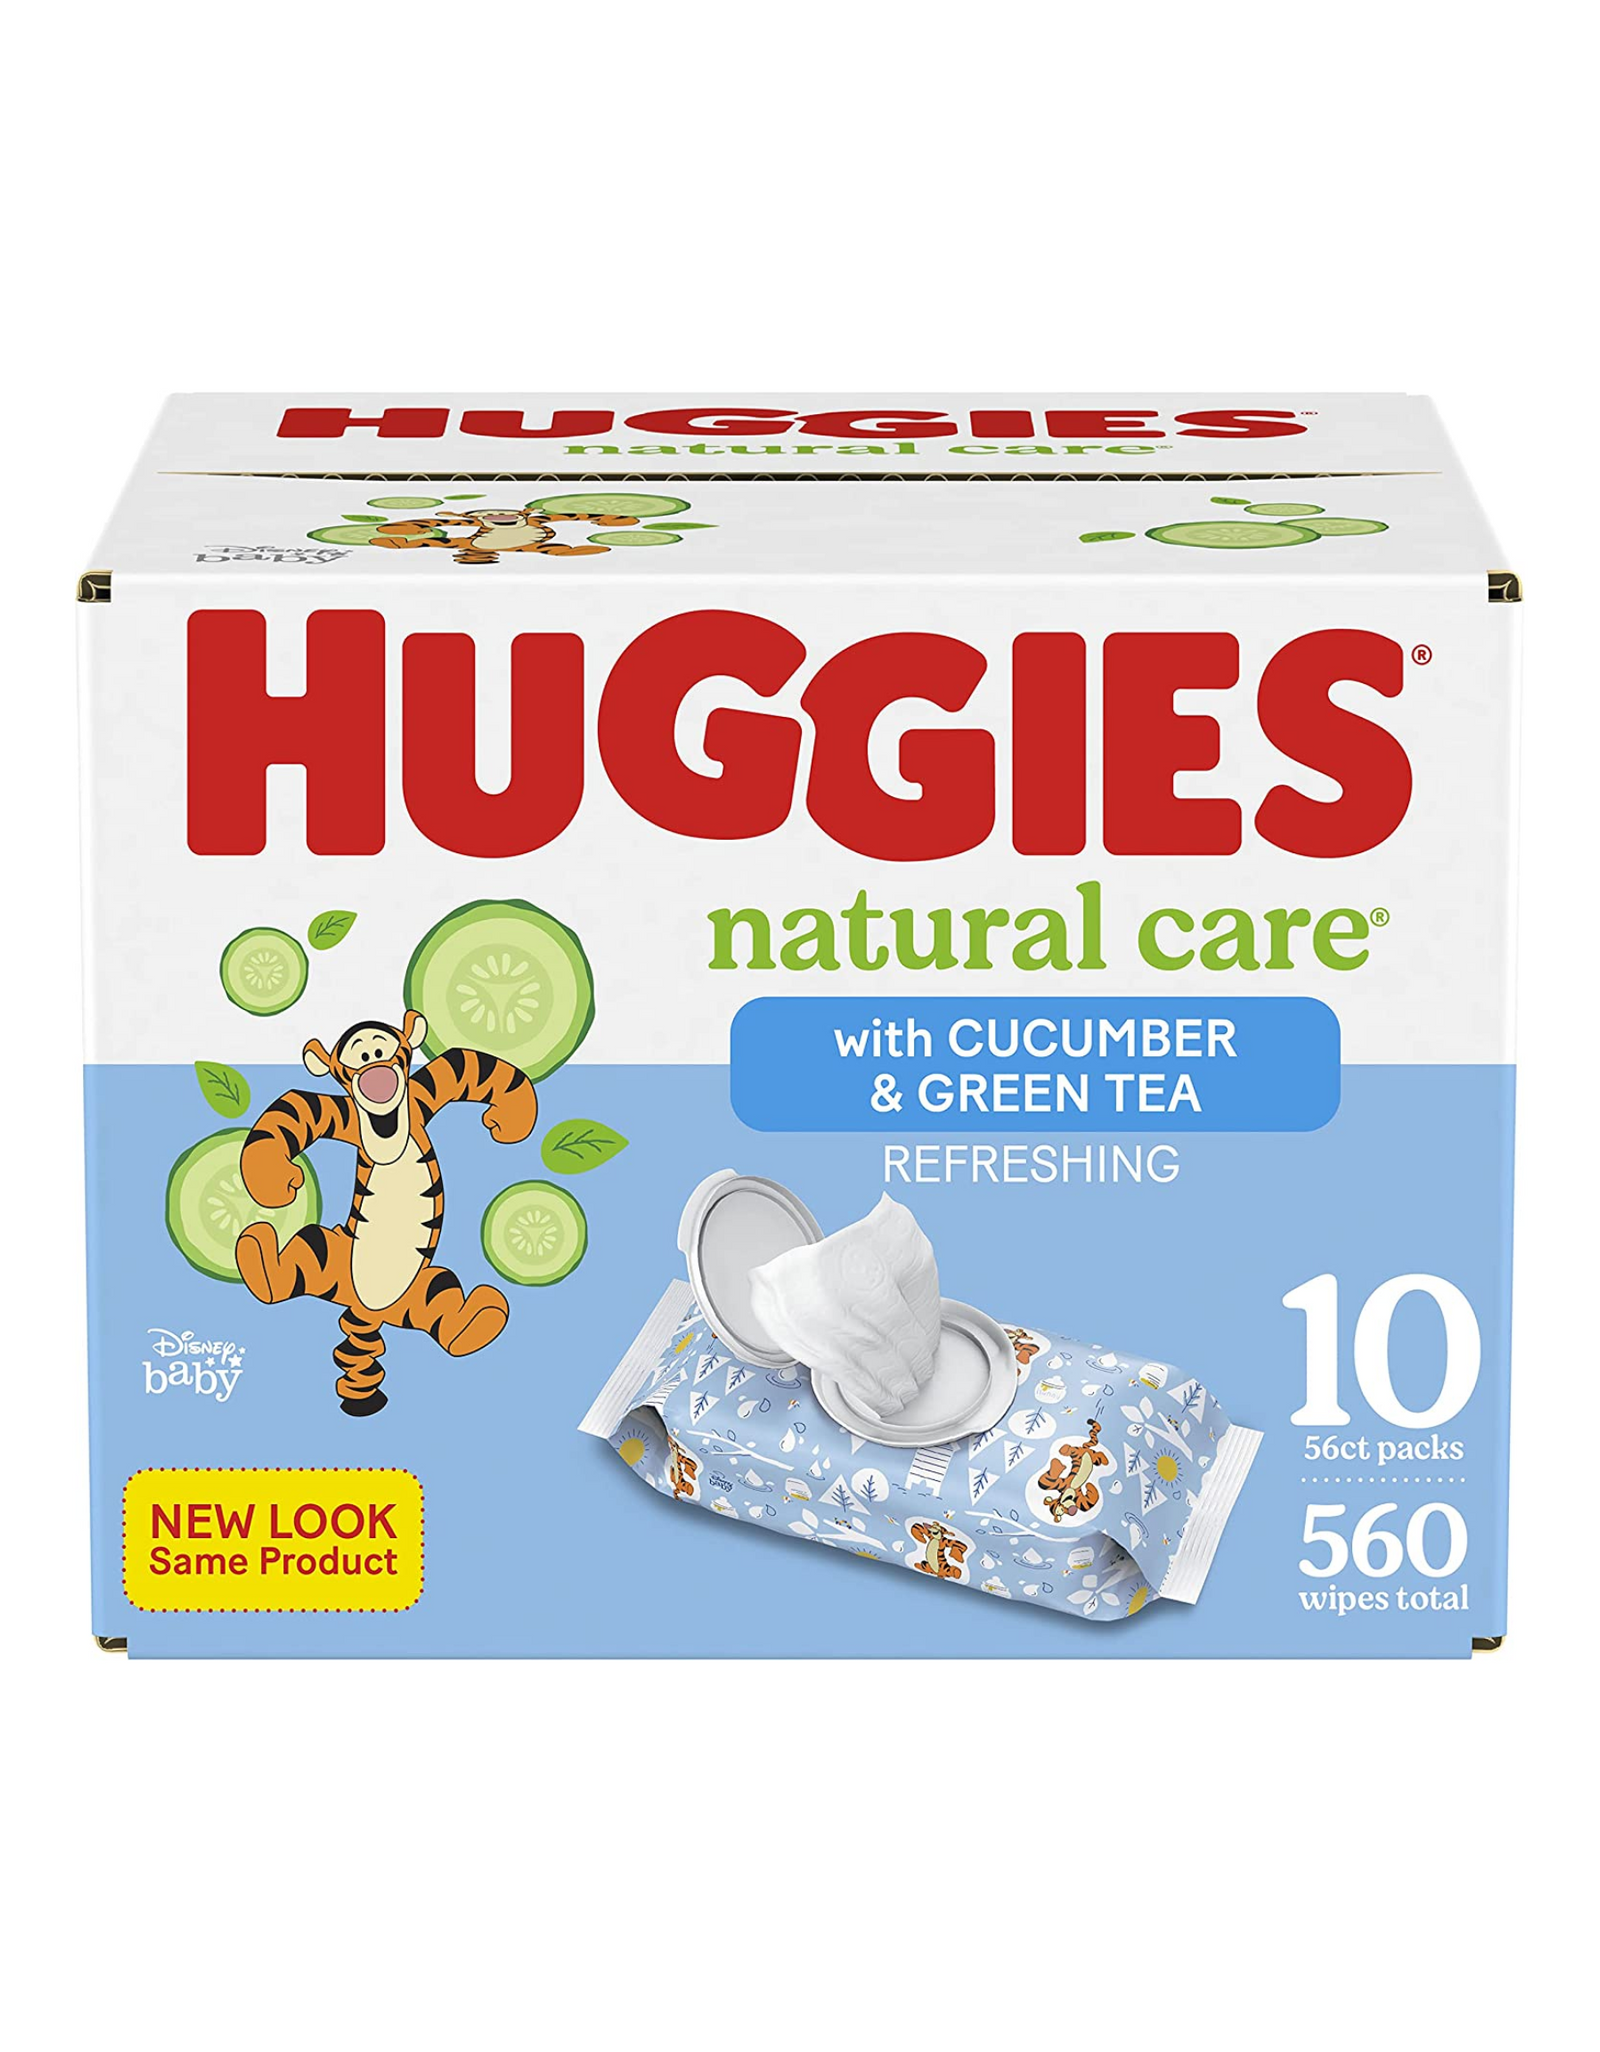 Baby Wipes, Huggies Natural Care, Refreshing Baby Diaper Wipes, 560 Wipes Total (10 Packs)